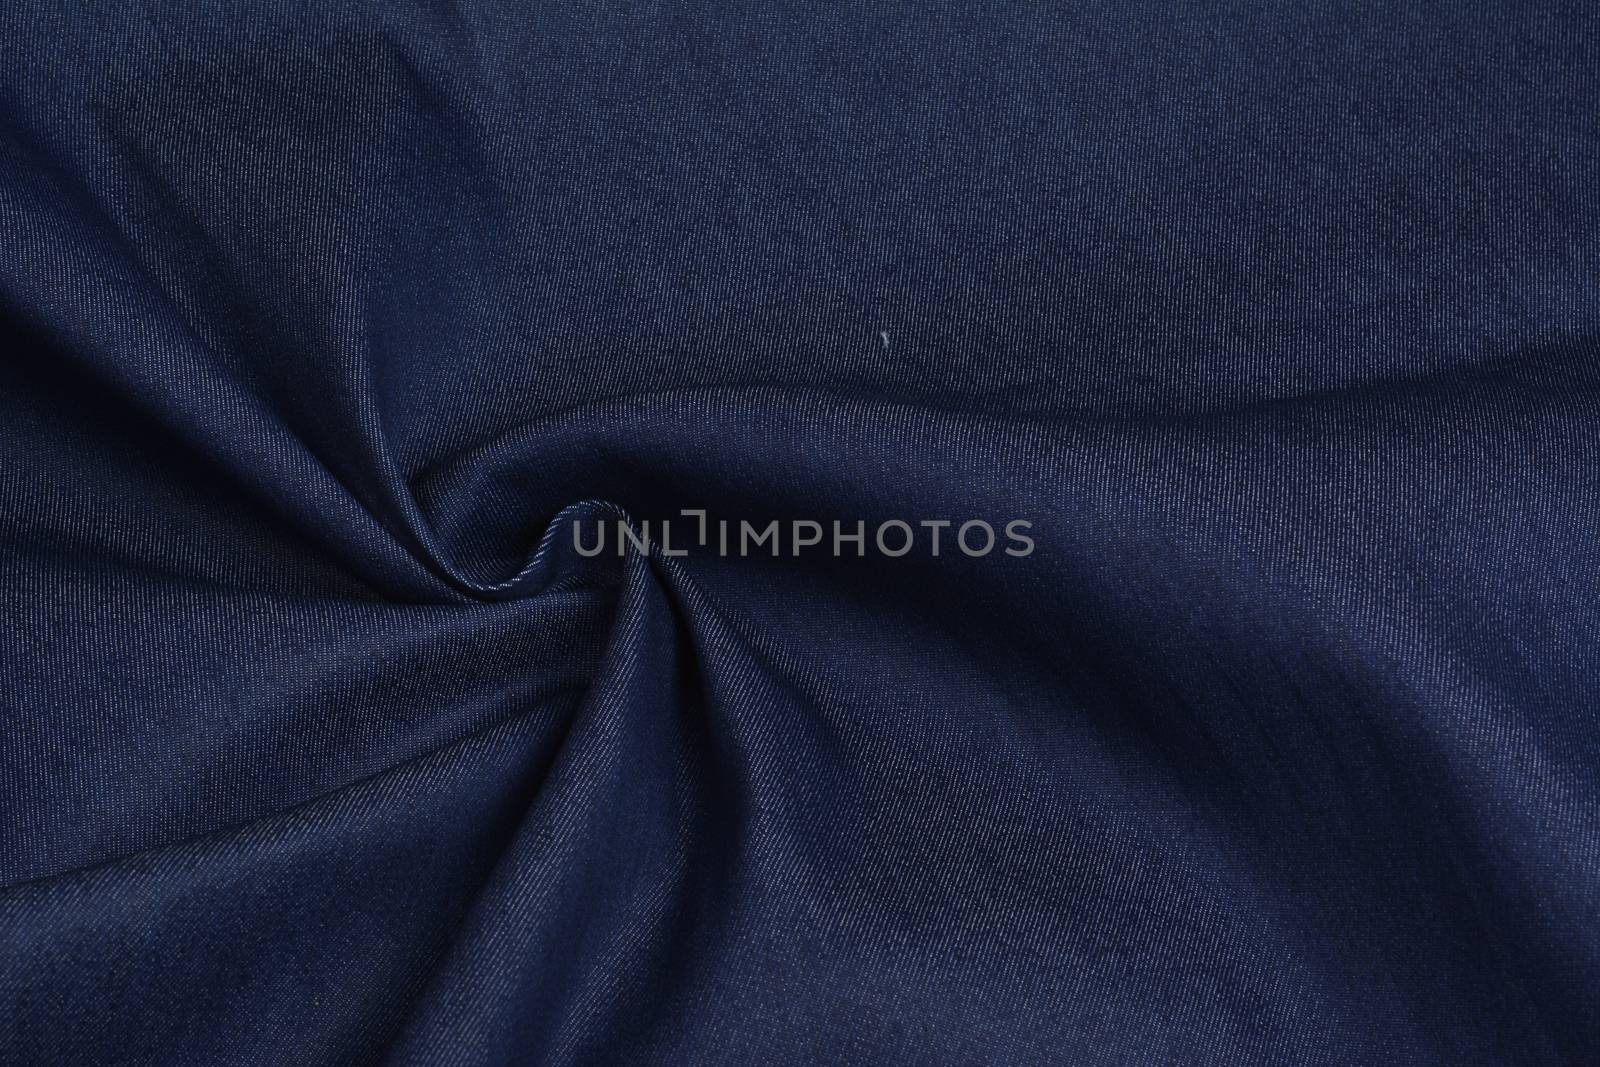 blue fabric texture, closeup, background by polyats